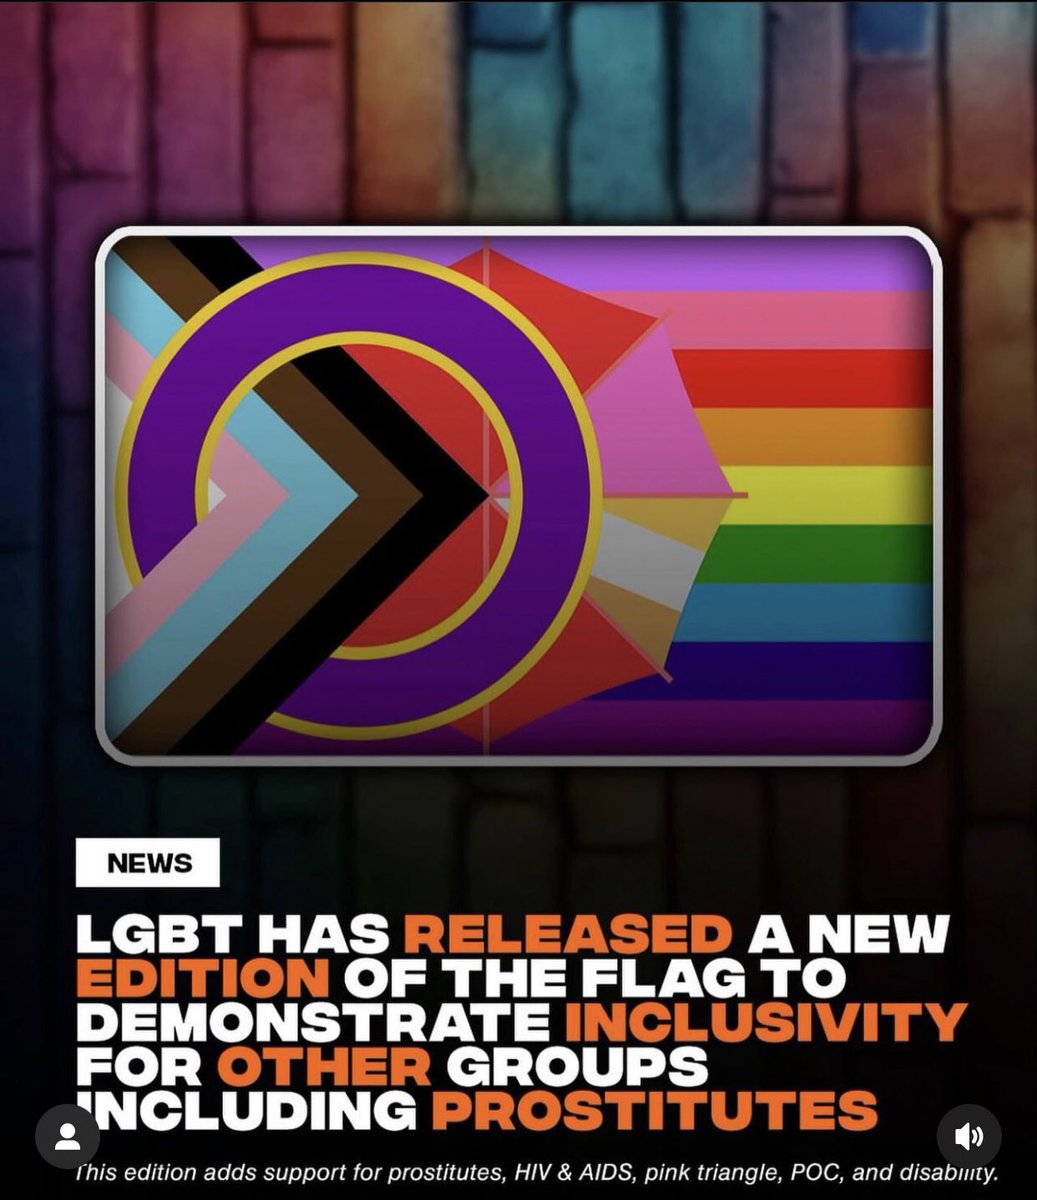 Can’t wait for the straight inclusivity version flag. Heck that will complete the circle of trust won’t it!? All sexual orientations will then be represented! It’s gonna be so AWESOME!